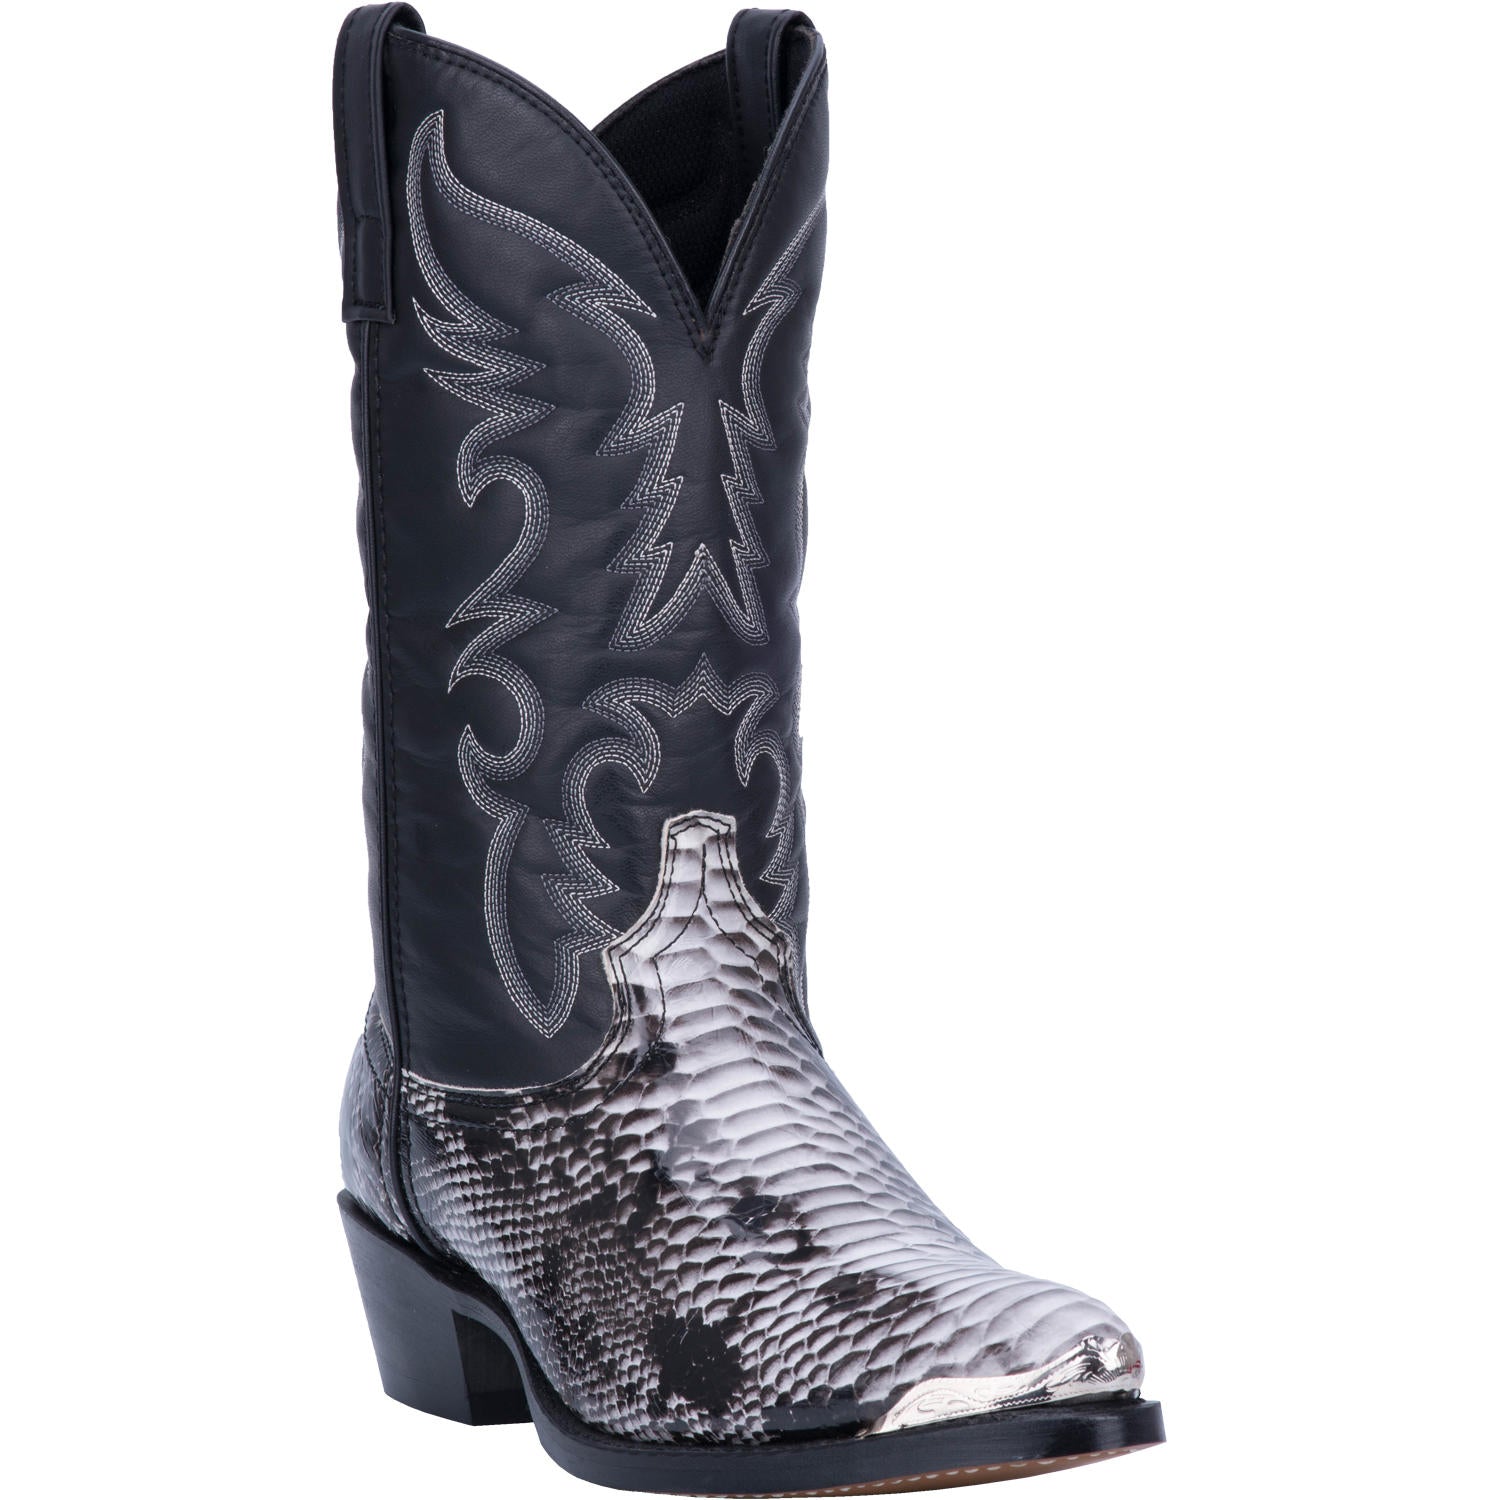 silver tipped cowboy boots